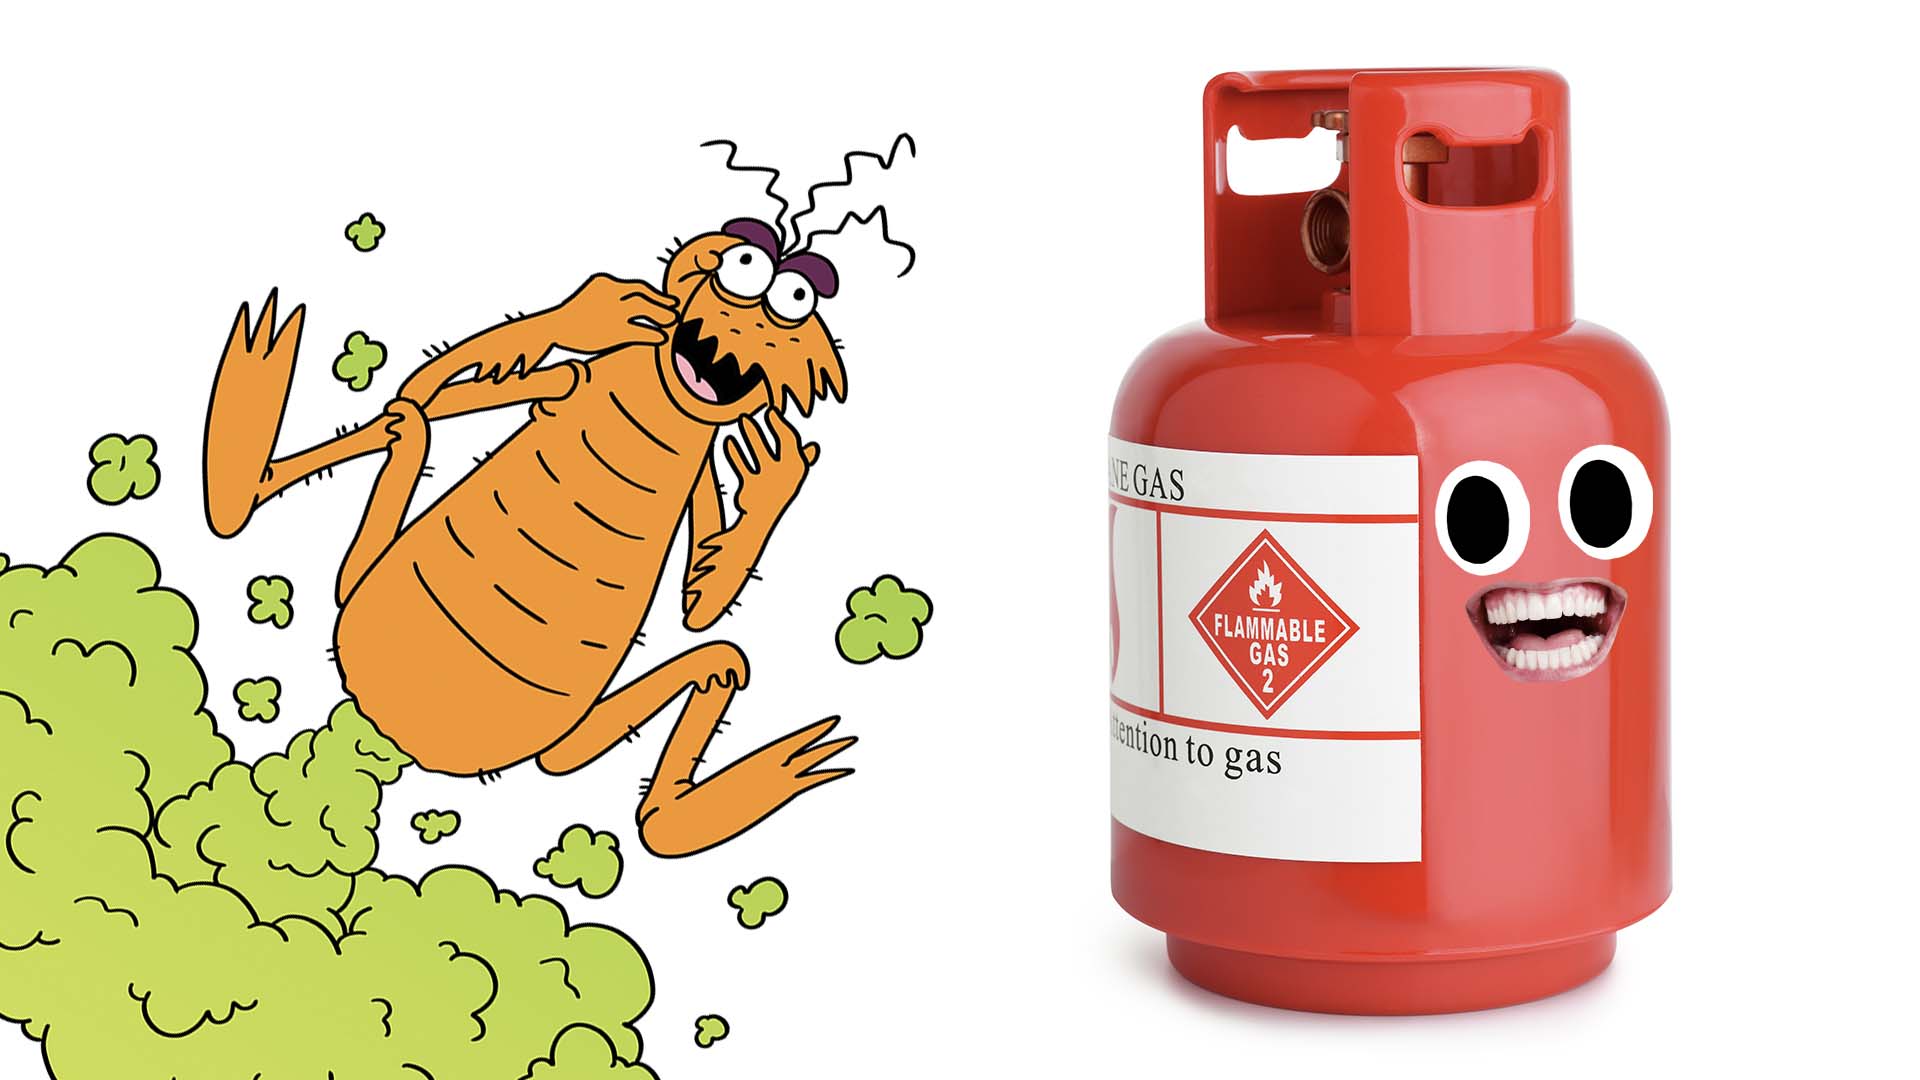 A flea next to a gas canister